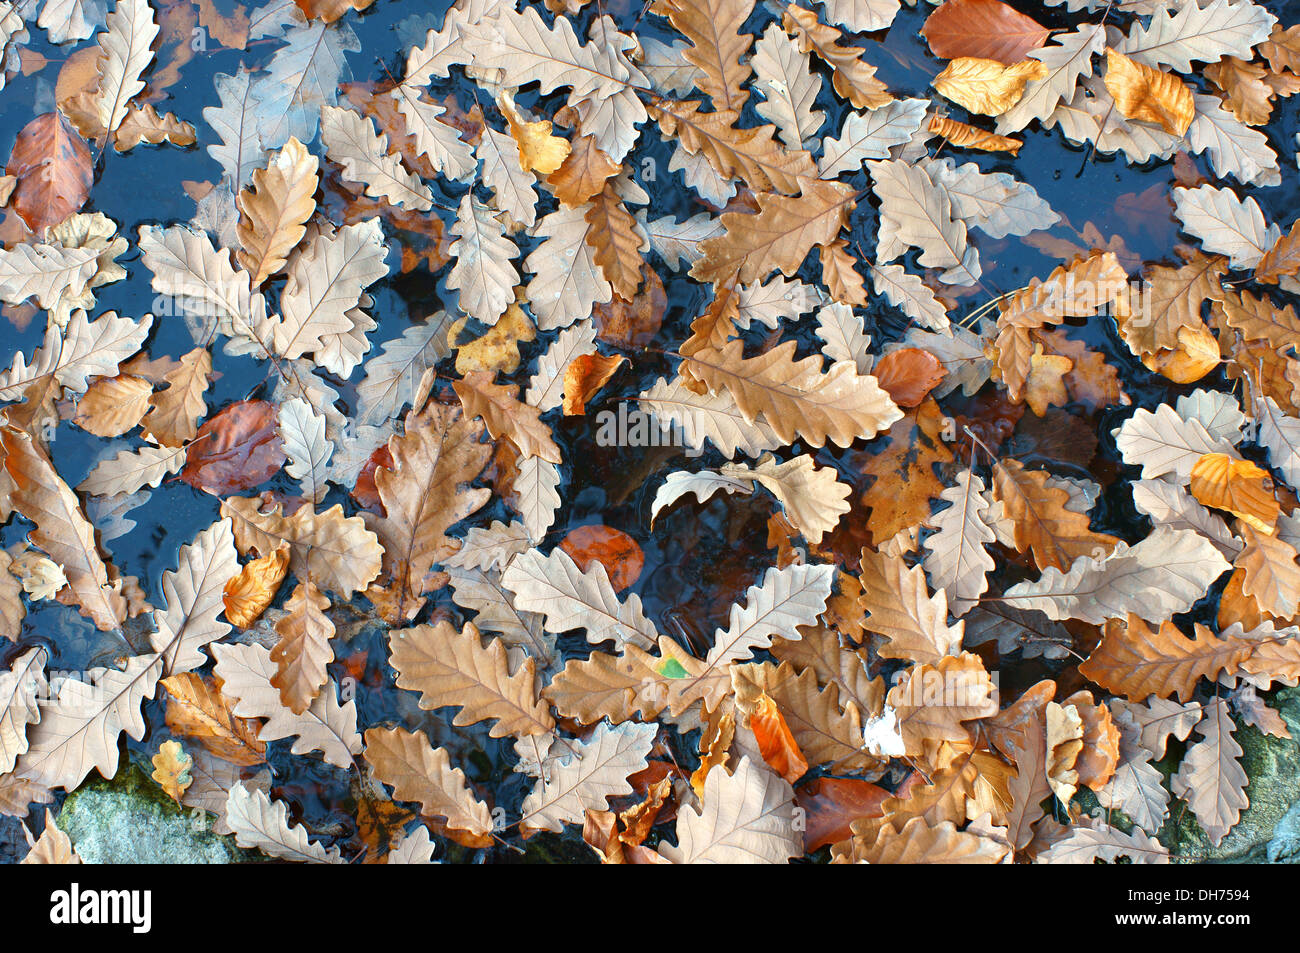 Fallen sessile oak leaves floating on the water Quercus petraea Stock Photo